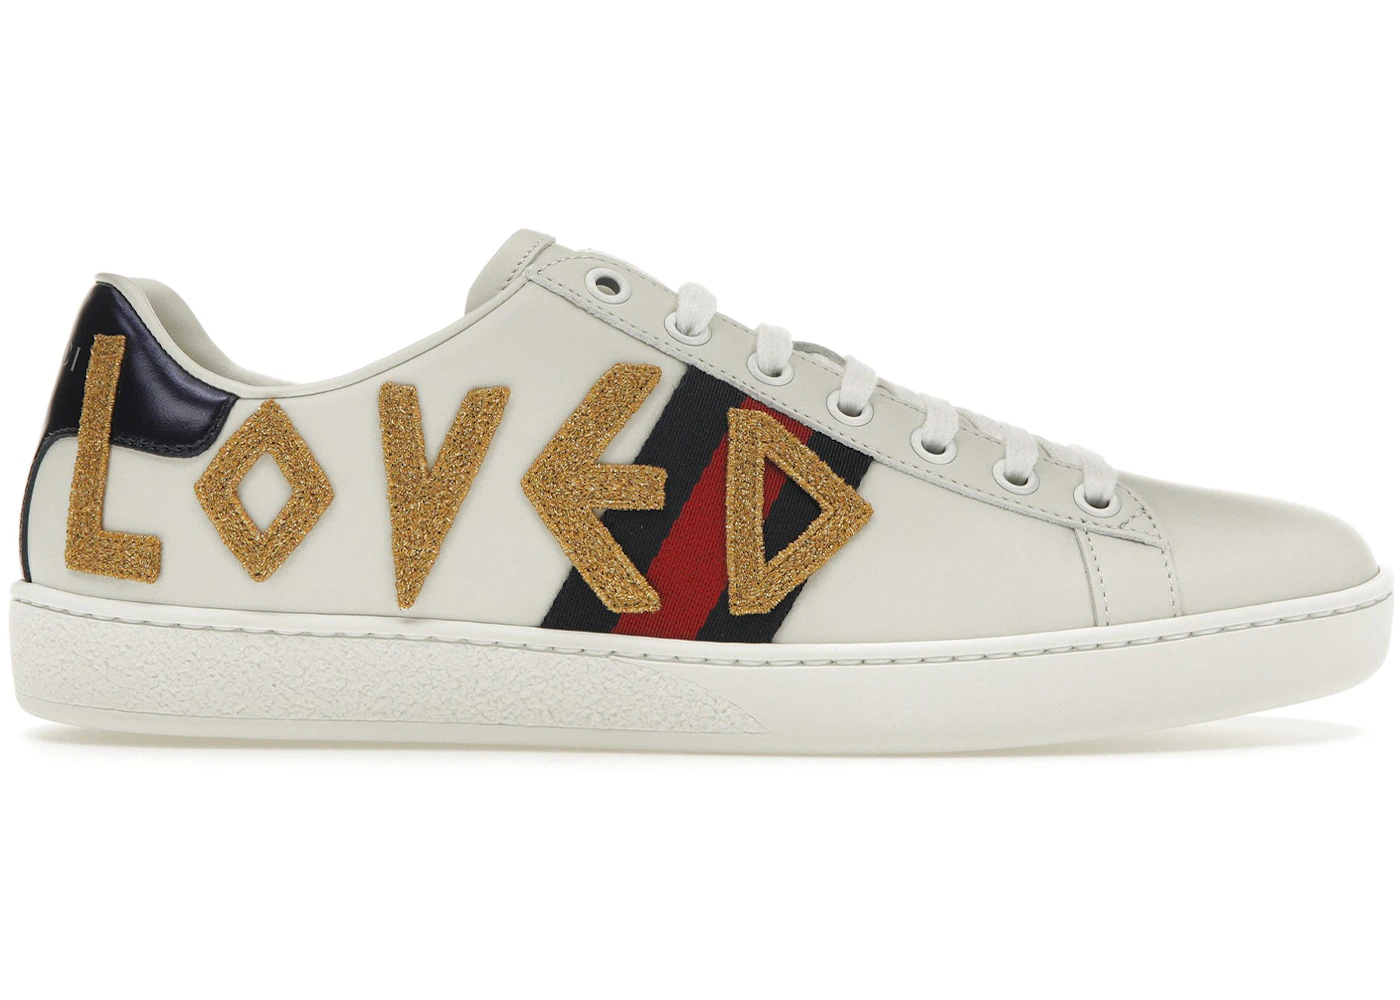 Gucci Ace Embroidered Love (Women's) - 505328 DOPE0 9095 - US